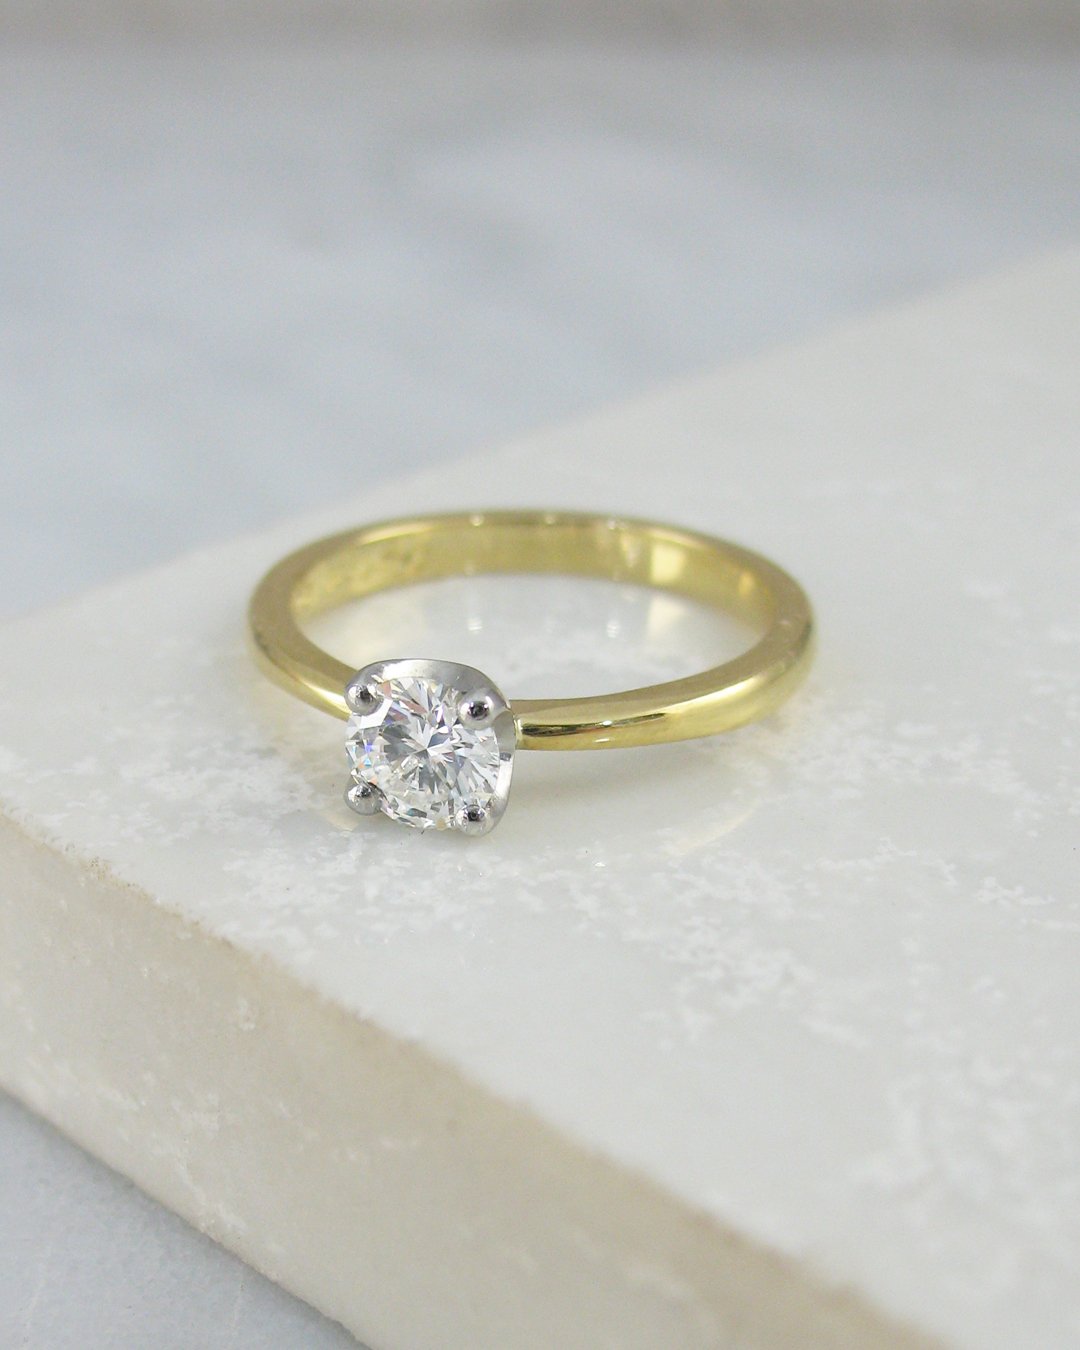 A simple diamond solitaire engagement ring